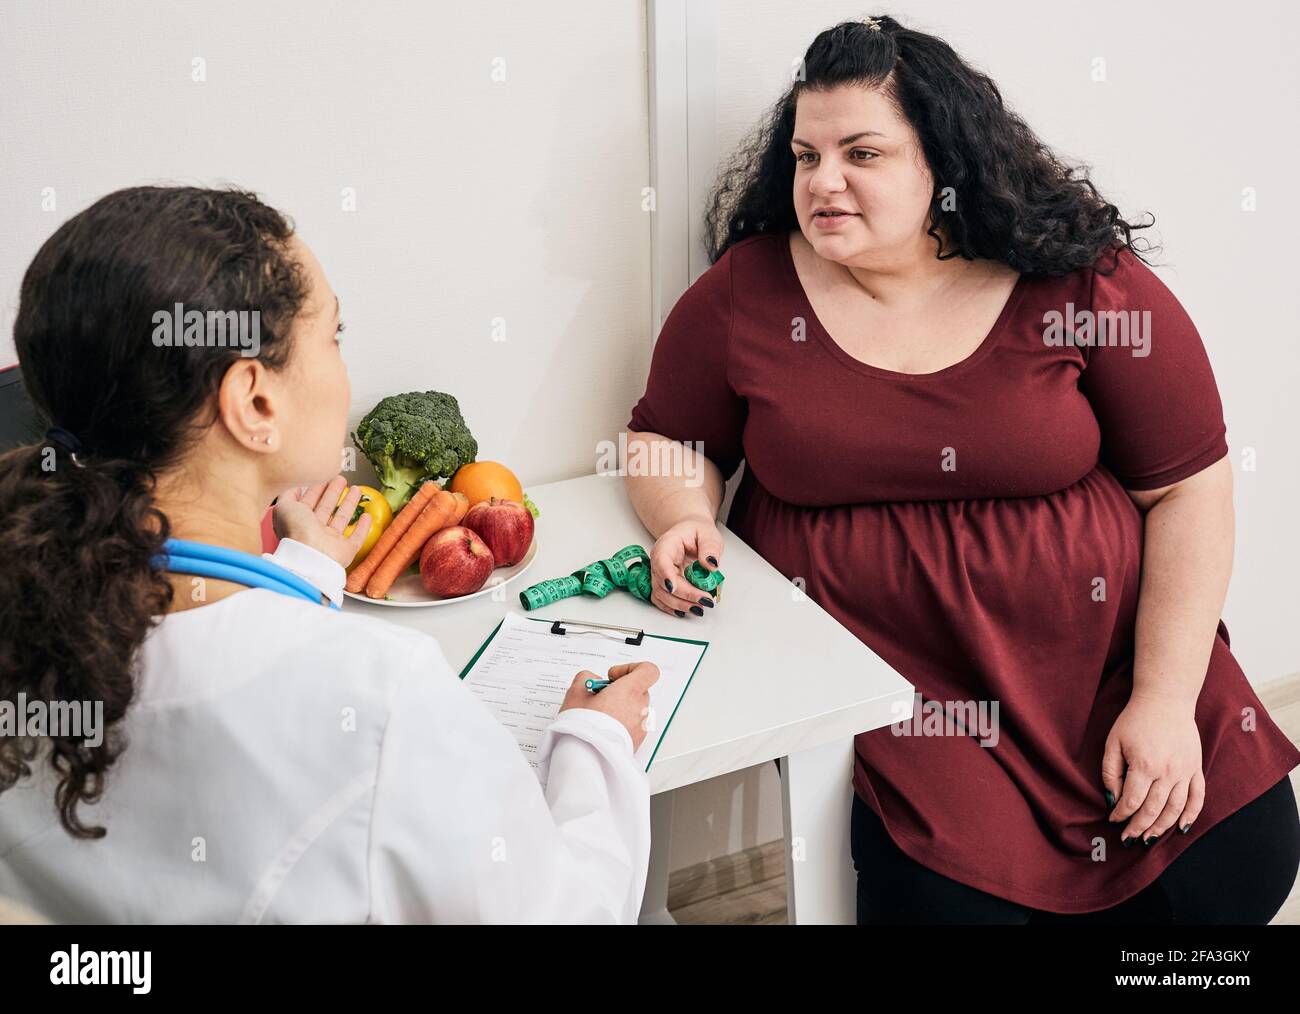 Nutritionist consultation. Dietitian plans meal plan for a female overweight patient Stock Photo